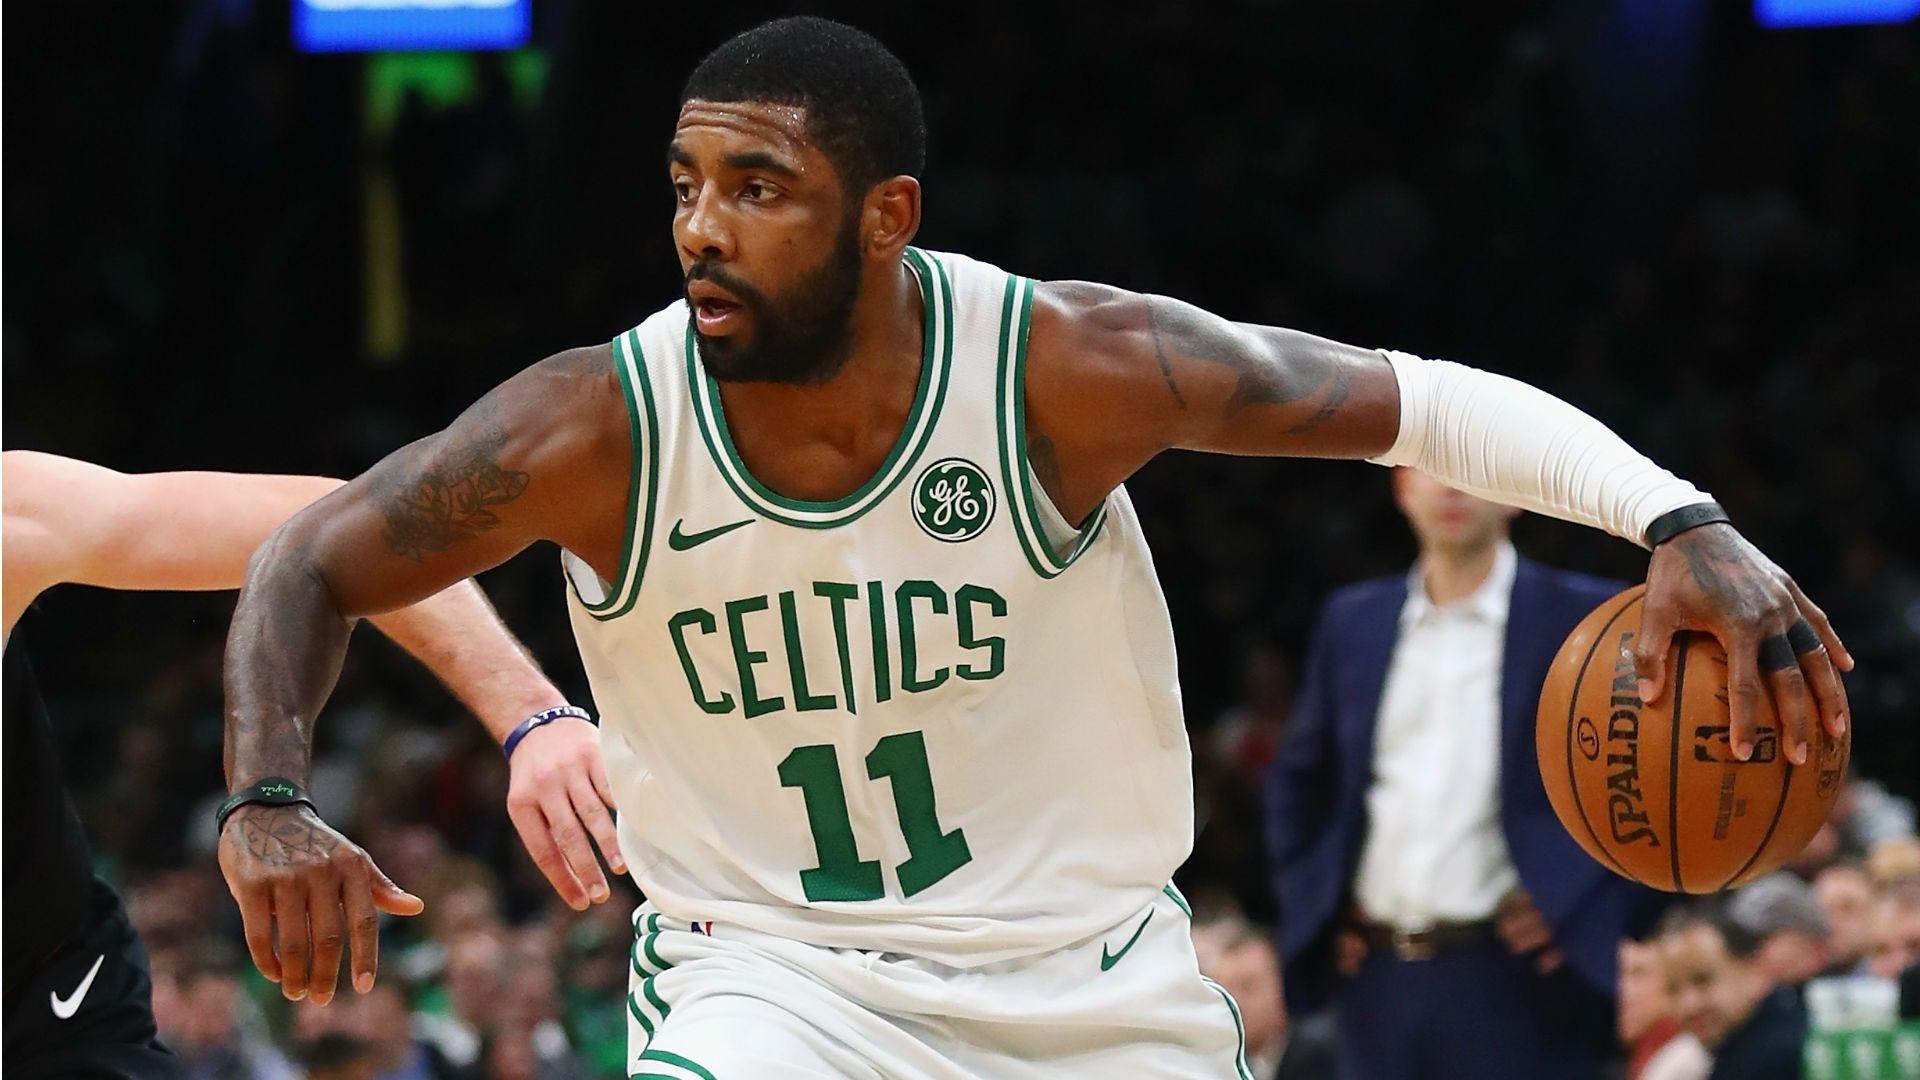 Kyrie Irving thrives on 'peaceful' feeling of being in the zone